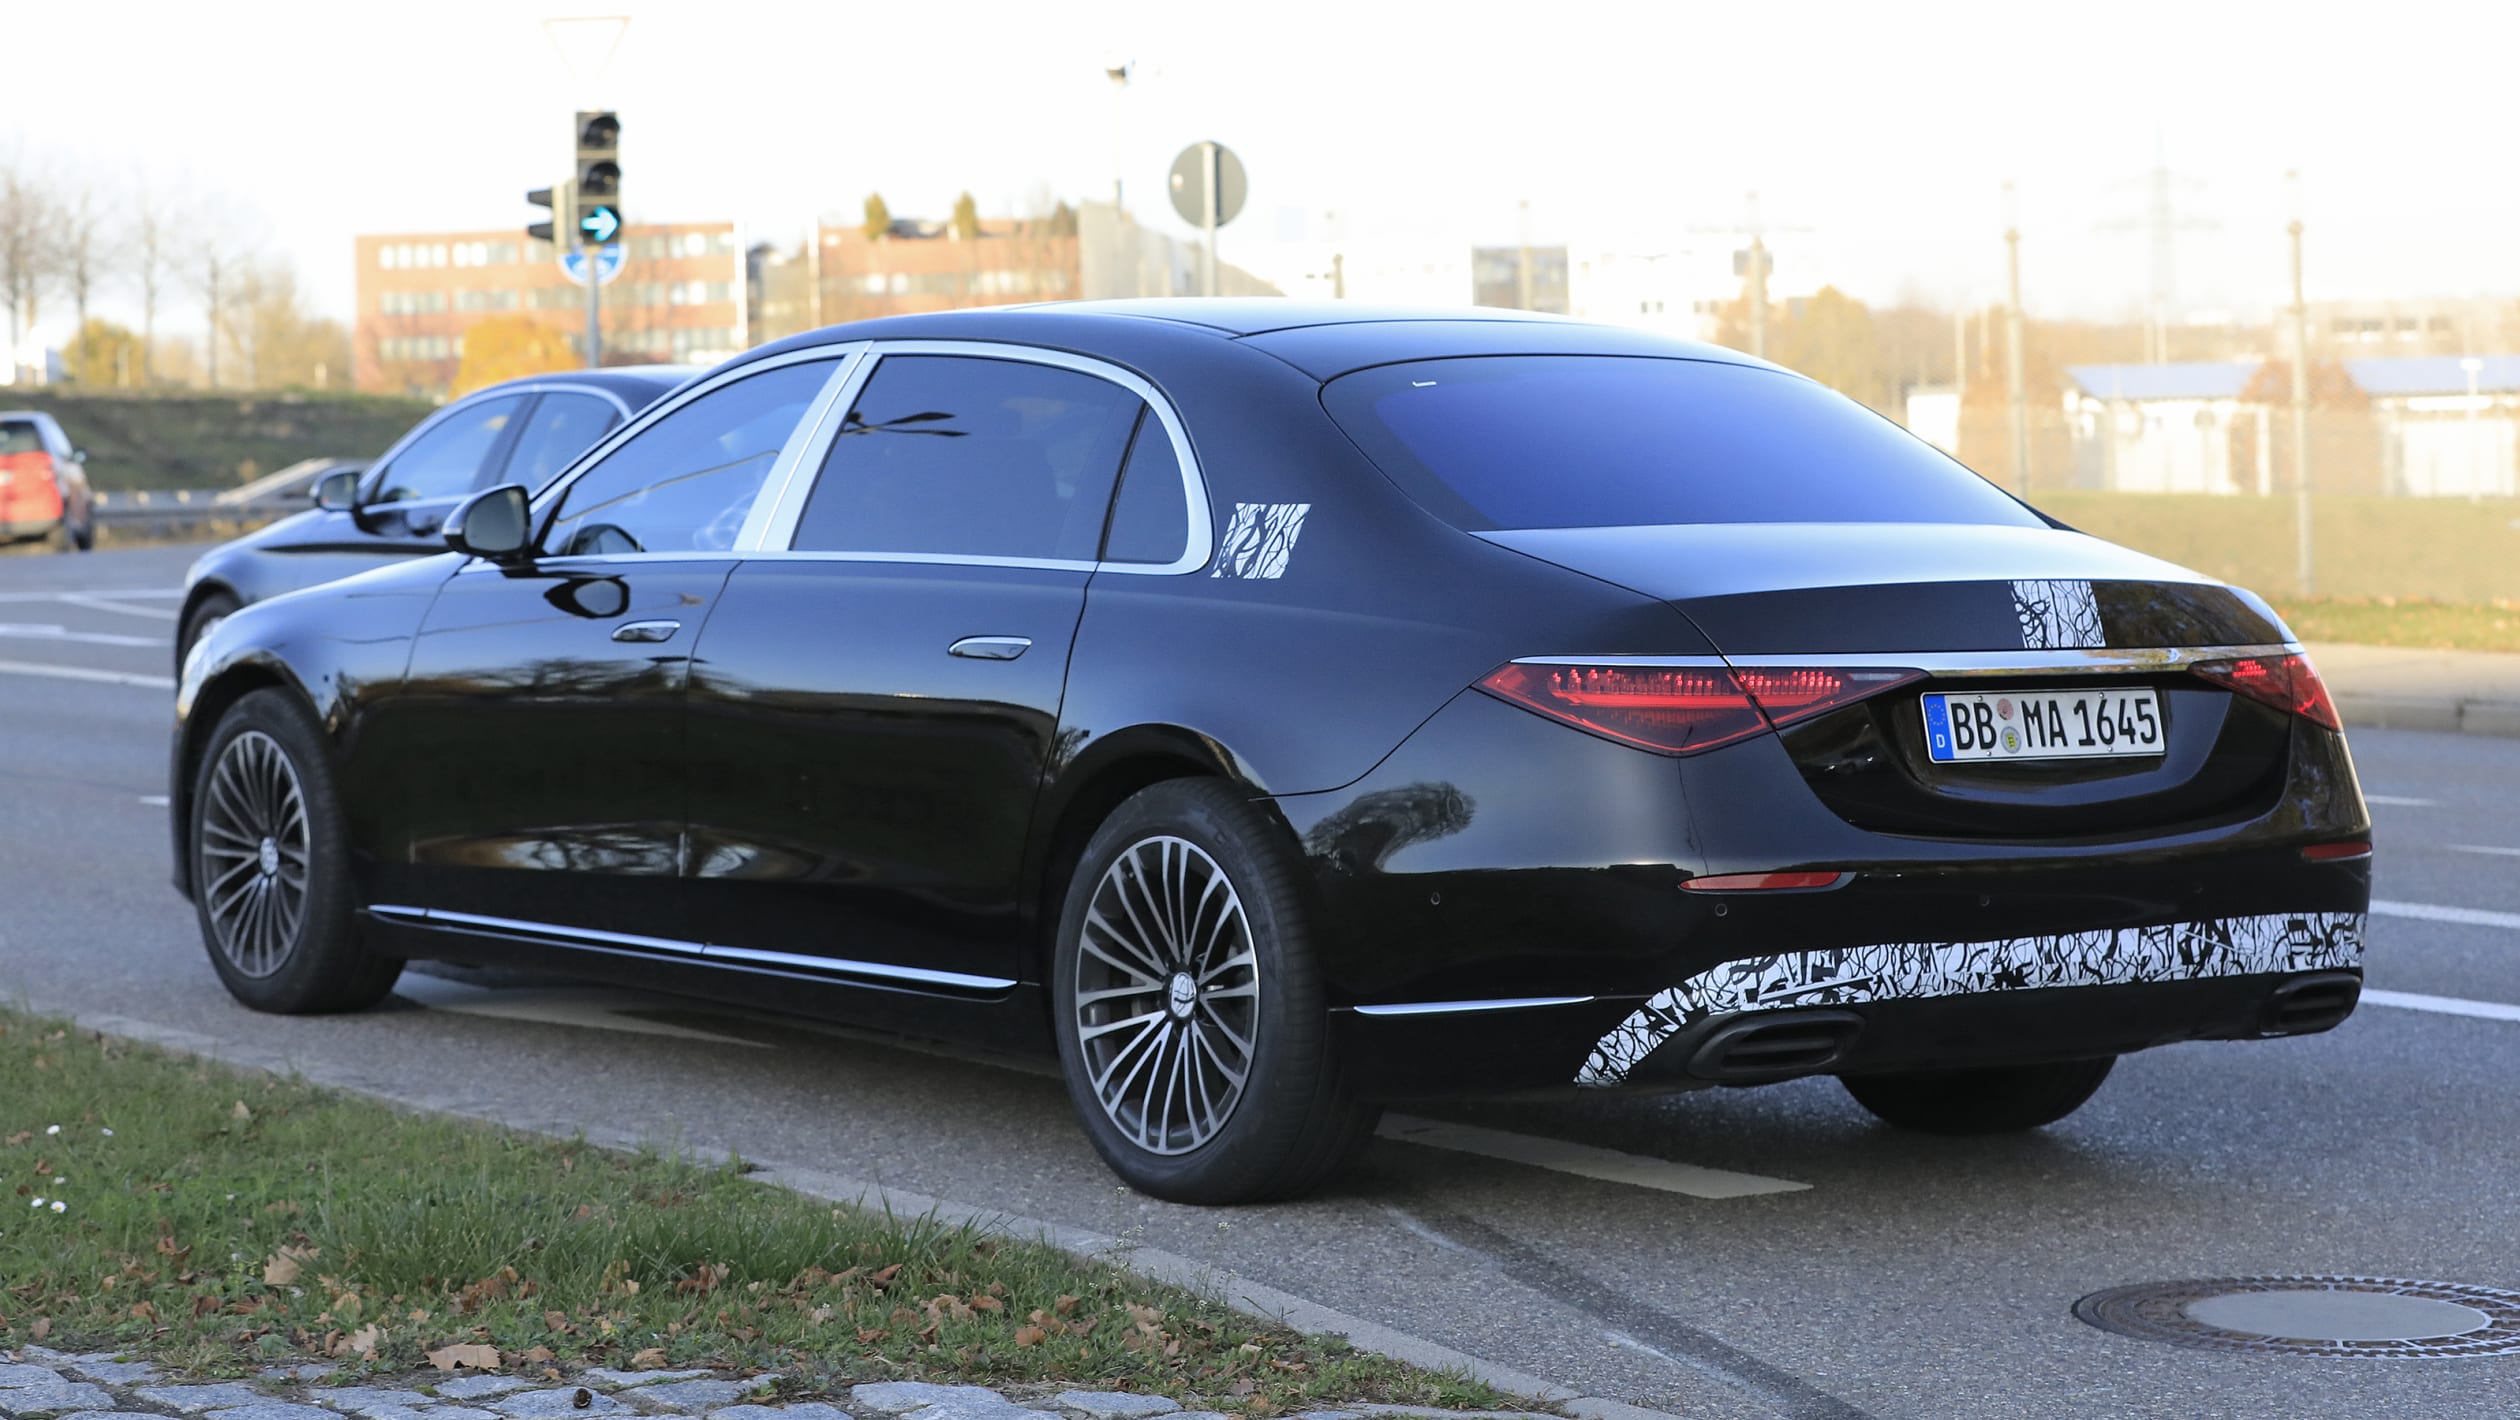 aria-label="Mercedes Maybach S Class 2"